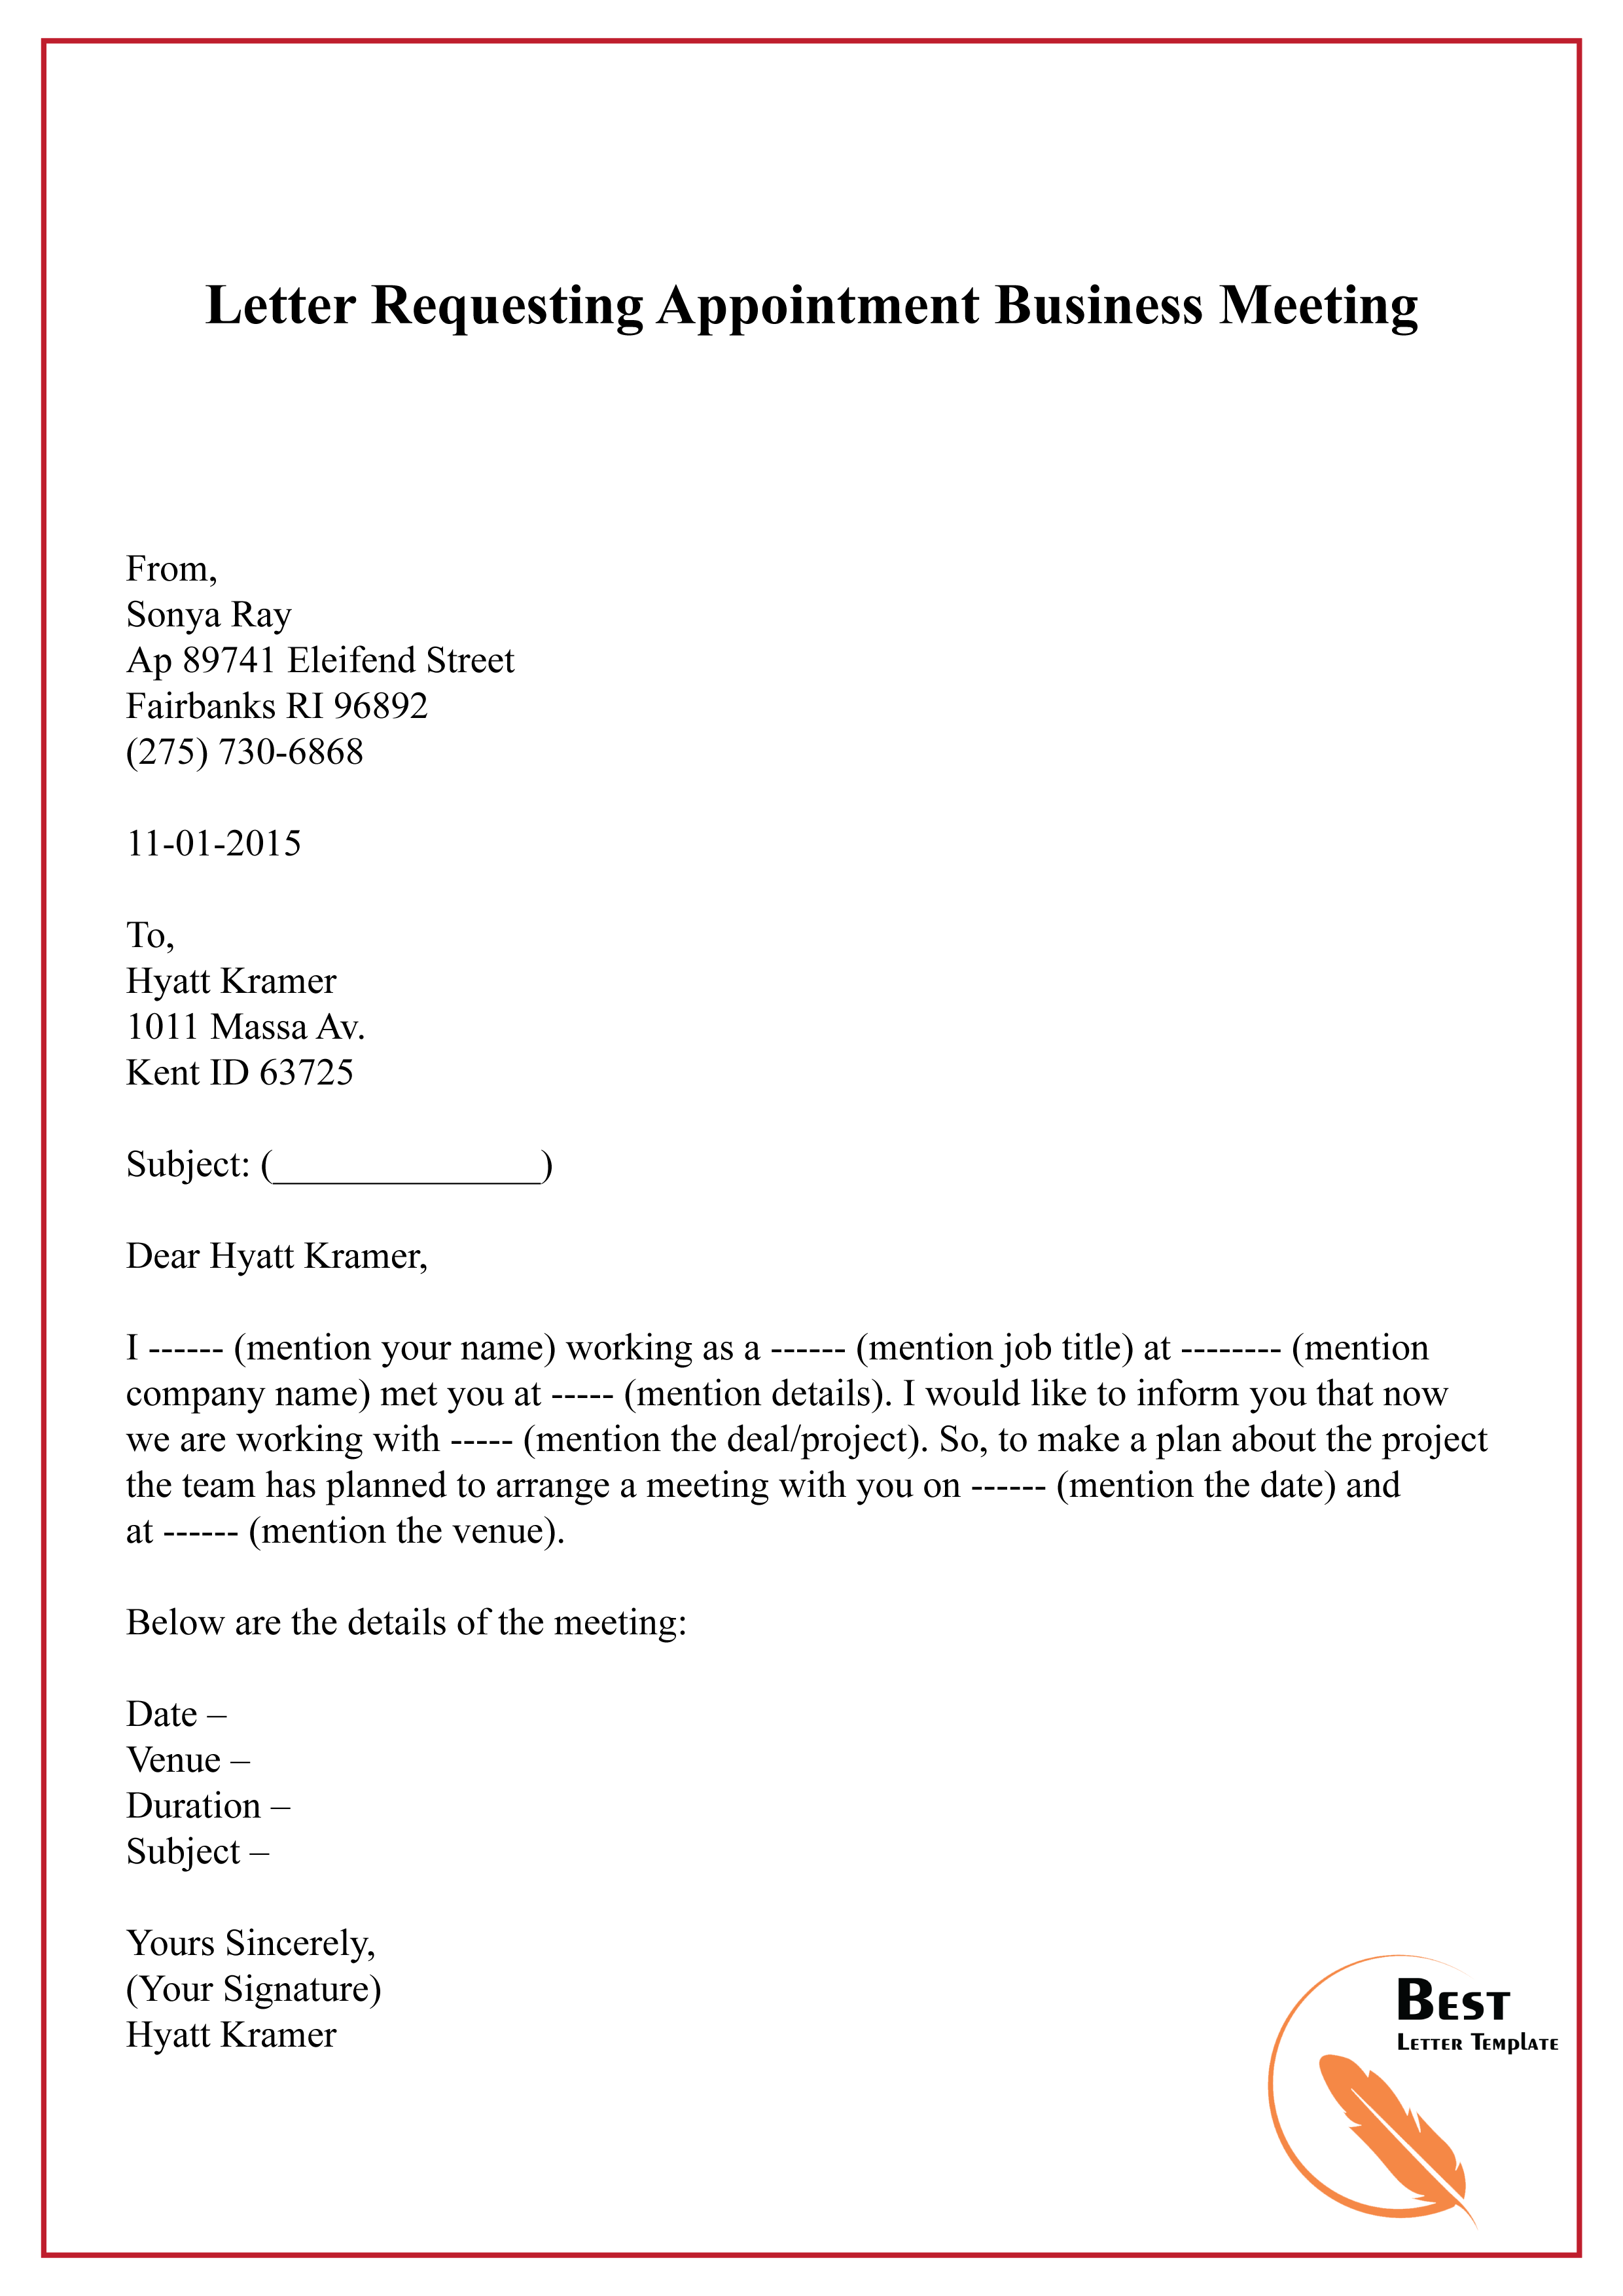 Appointment Request Letter Template Collection